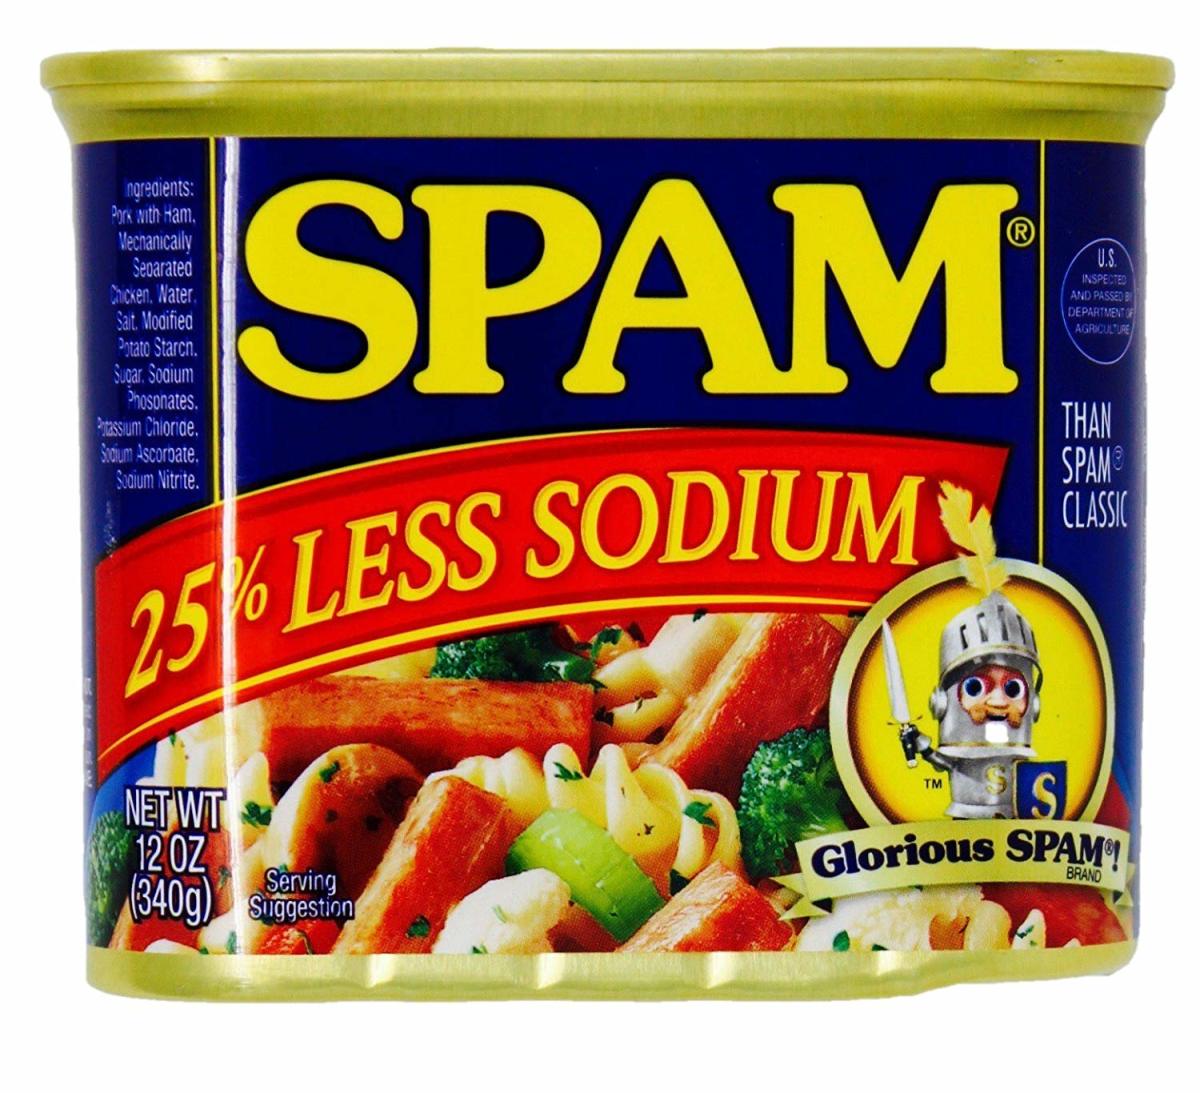 In 1986, SPAM with 25% less sodium was introduced into the marketplace. 